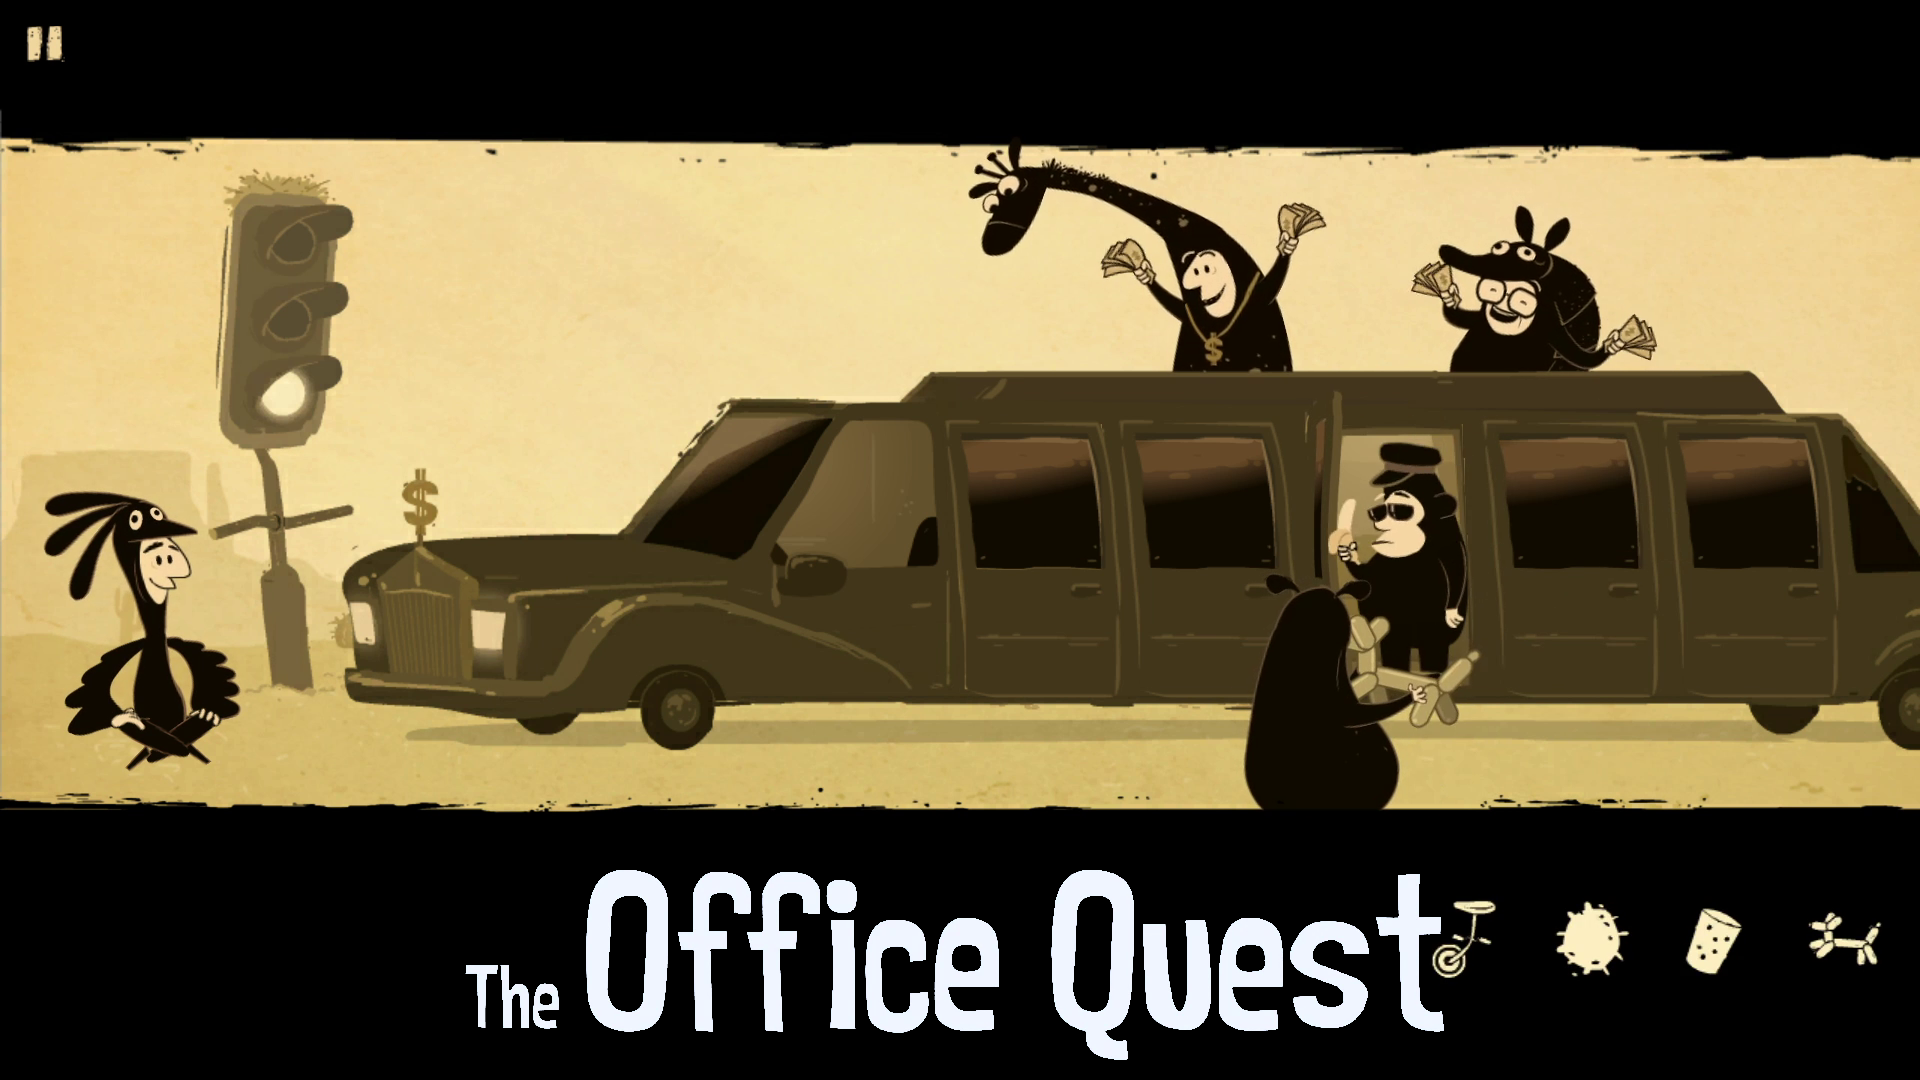 Meet the Cactus Boss – Let’s Play The Office Quest Episode 5